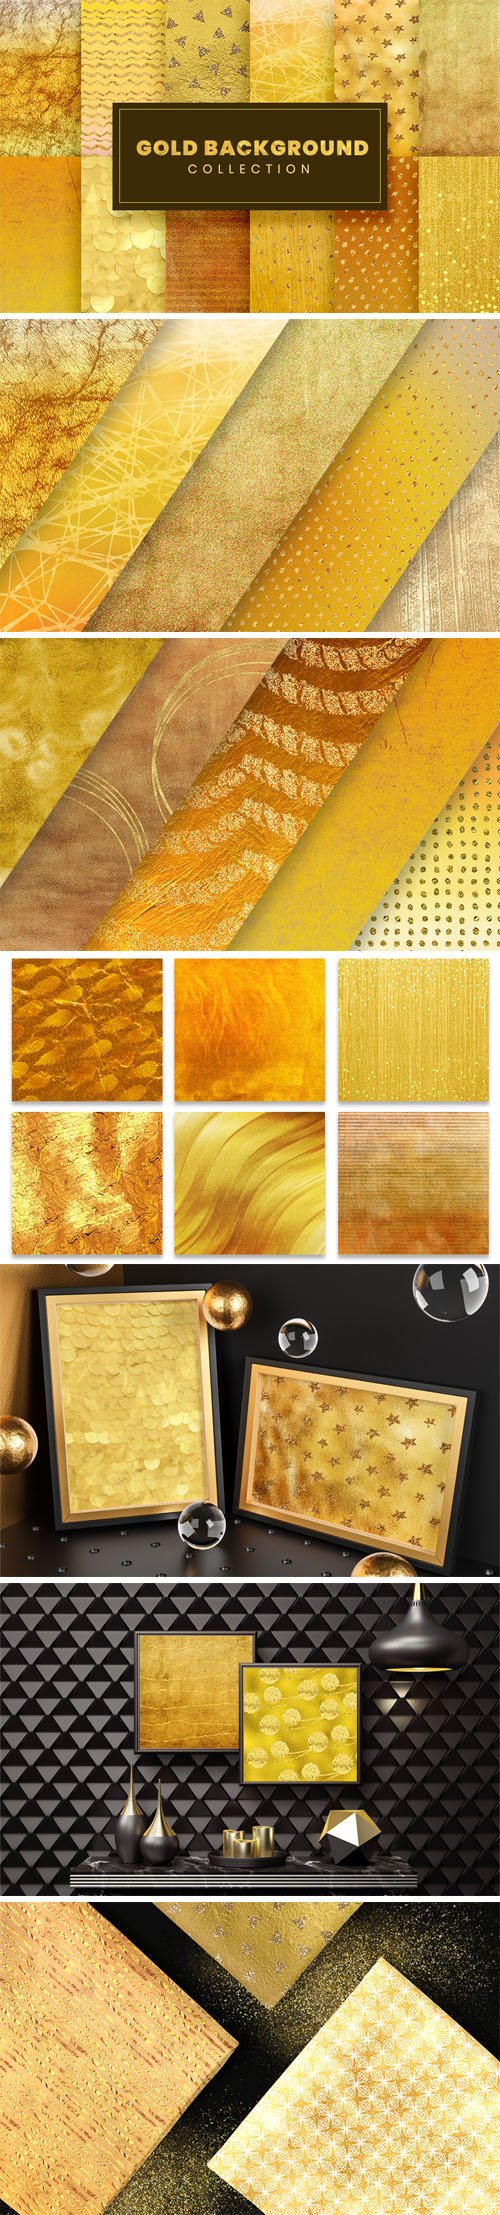 25 Gold Backgrounds Collection